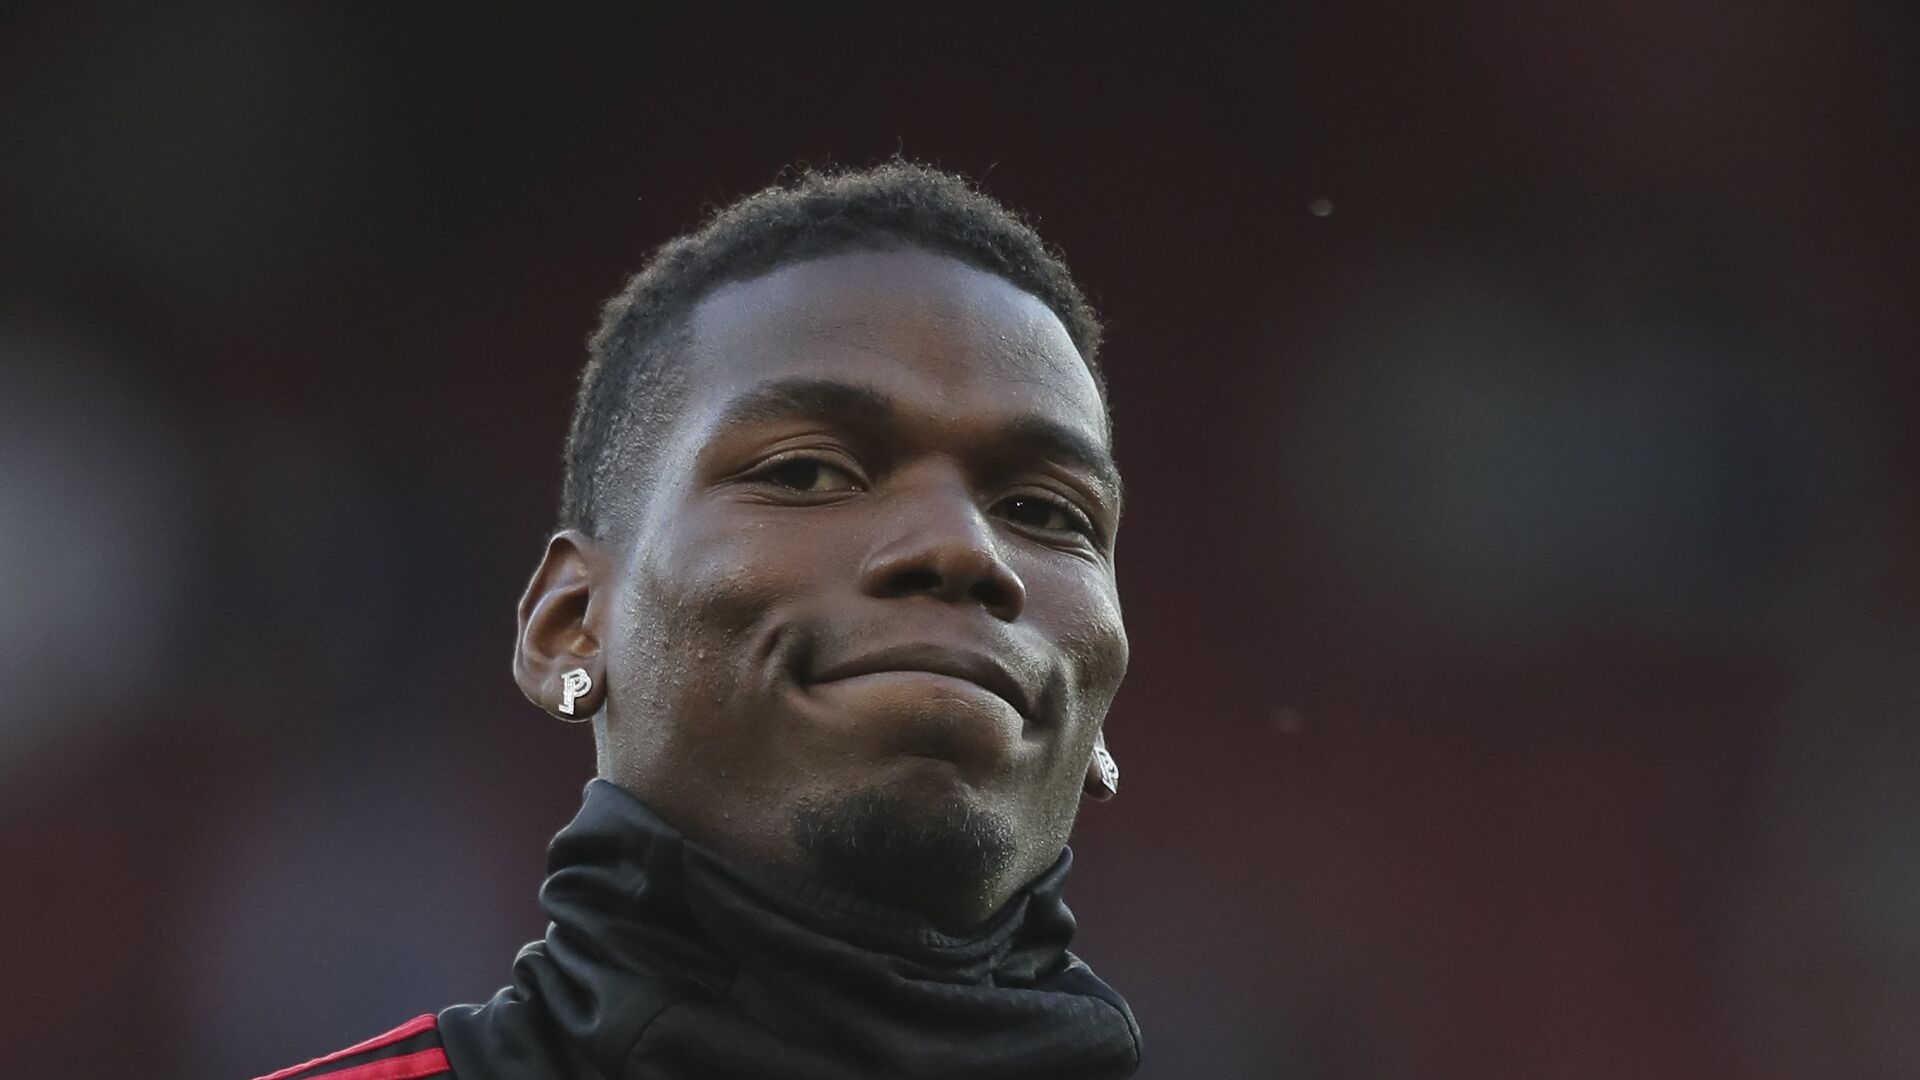 Manchester United's Paul Pogba applauds the fans as he takes part in the warm up prior to the start of the English Premier League soccer match between Manchester United and Leicester City at Old Trafford, in Manchester, England, Friday, Aug. 10, 2018 - اسپوتنیک افغانستان  , 1920, 16.05.2022